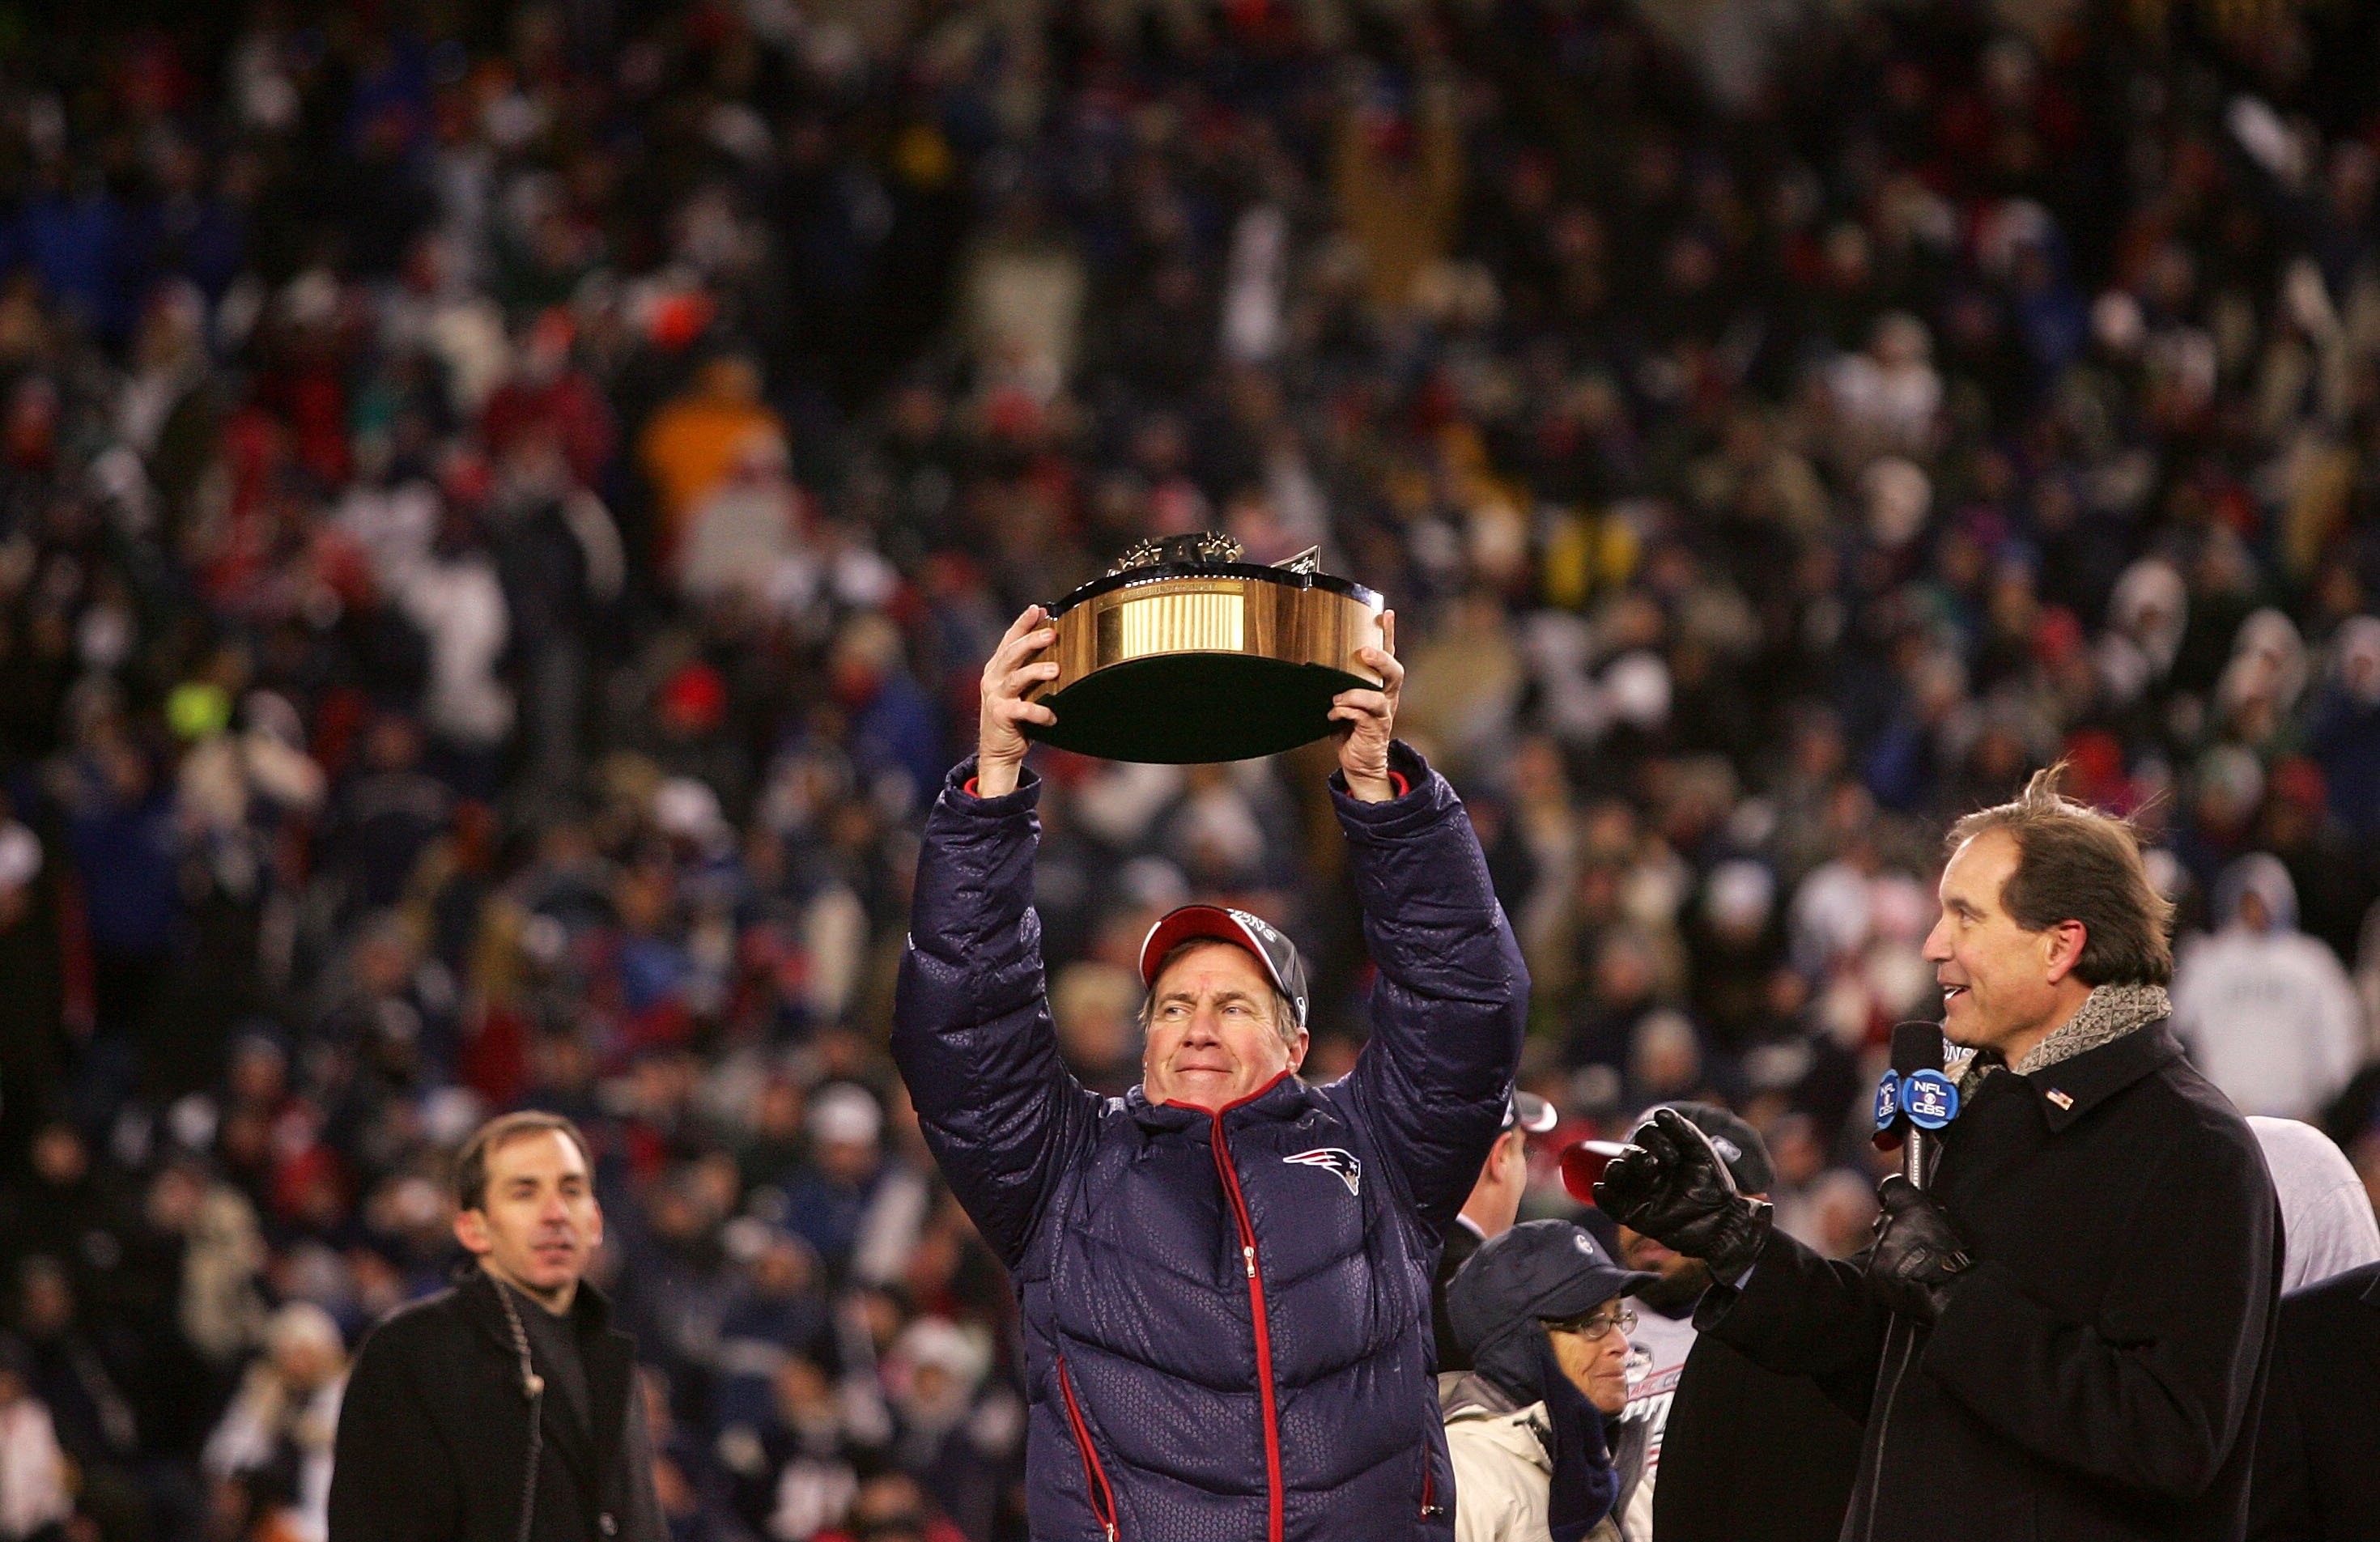 FOXBORO, MA - JANUARY 20:  Head coach Bill Belichick of the New England Patriots celebrates with the Lamar Hunt Trophy after the Patriots 21-12 win against the San Diego Chargers during the AFC Championship Game on January 20, 2008 at Gillette Stadium in